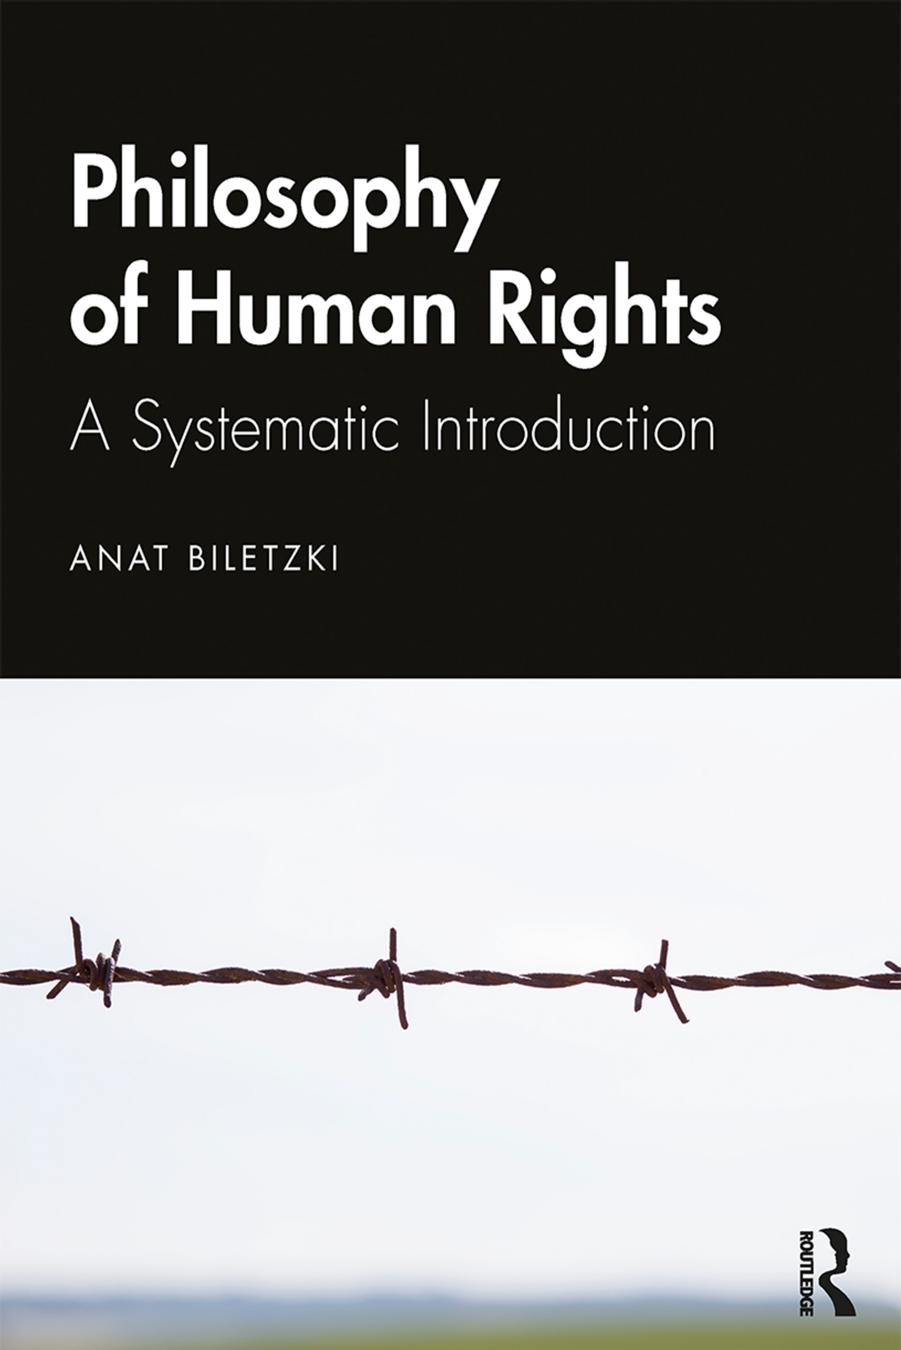 The Philosophy of Human Rights: A Systematic Introduction